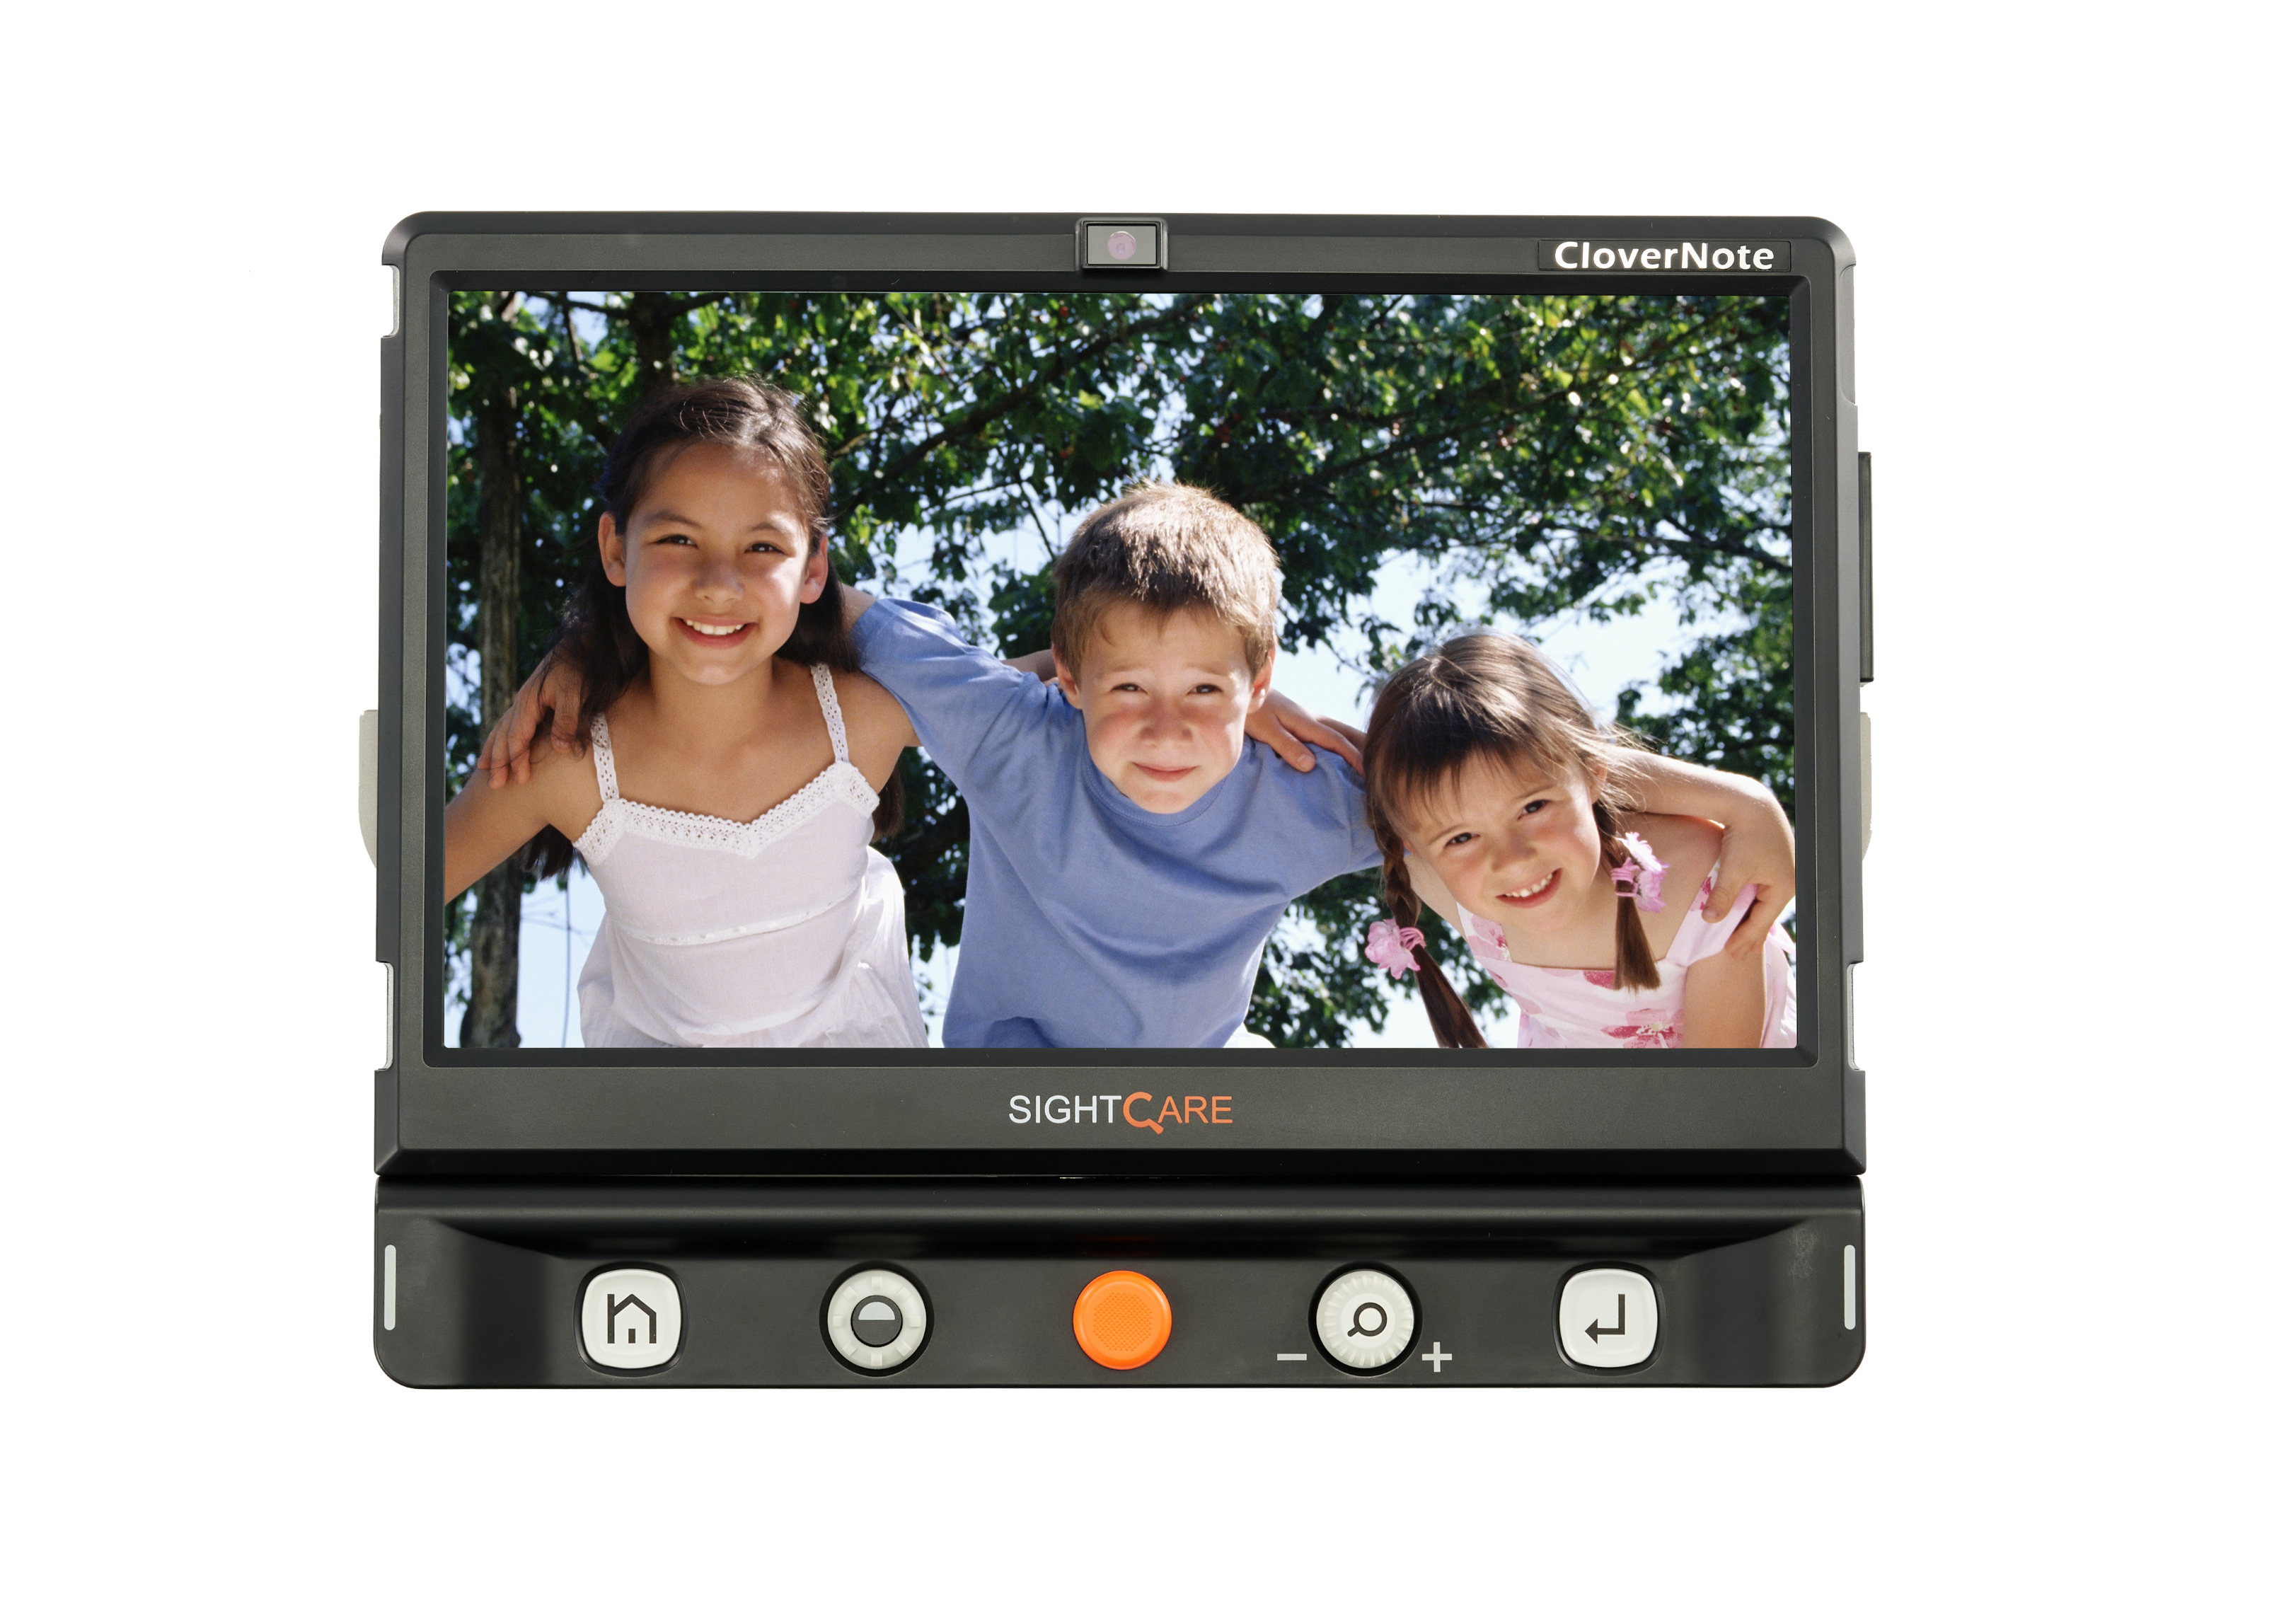 CloverNote with an image of 3 children on the screen